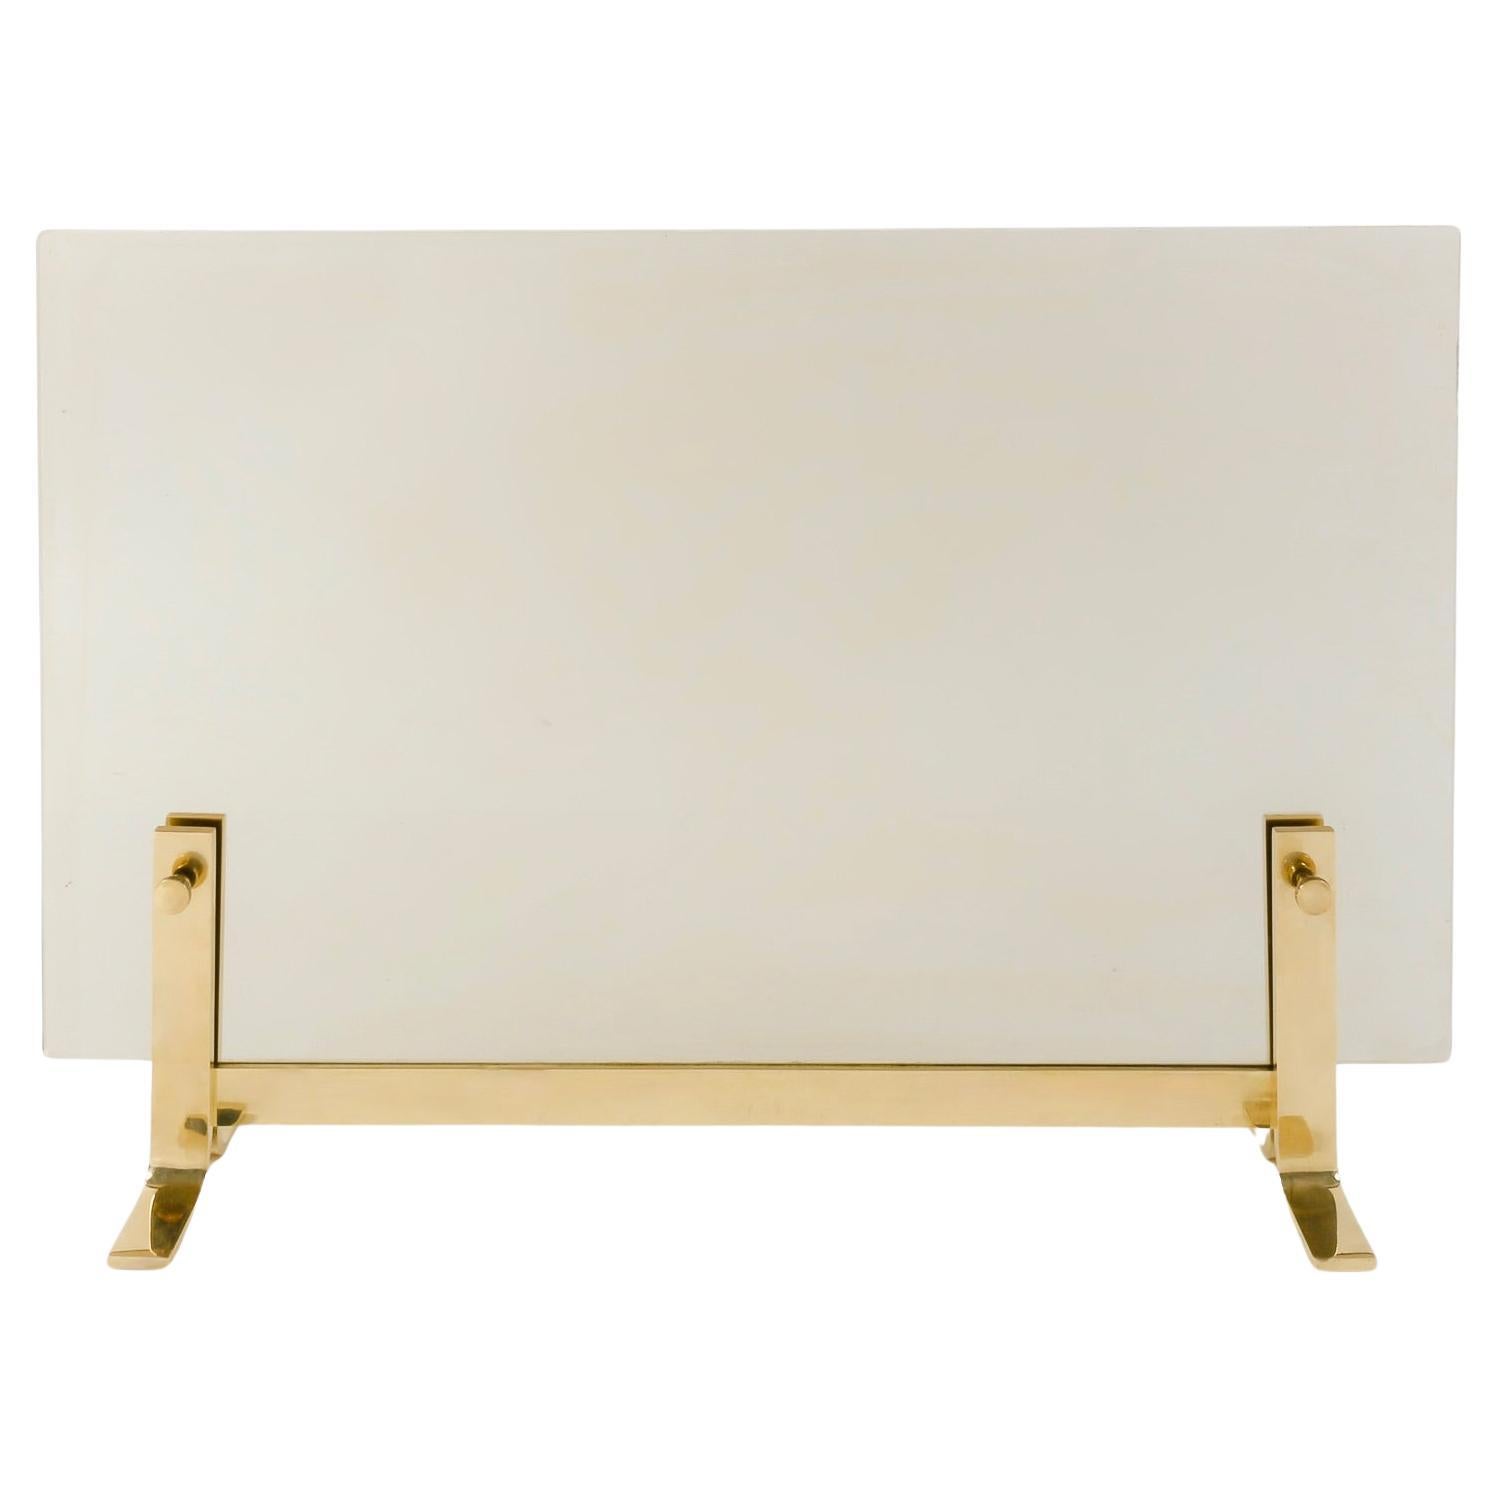 A gilded brass base consisting of a rectangular cross-section bar running the length of the firewall is held in place by 4 L-shaped gilded brass feet positioned on the outer parts, the slightly smoked safety glass screen is sandwiched between the